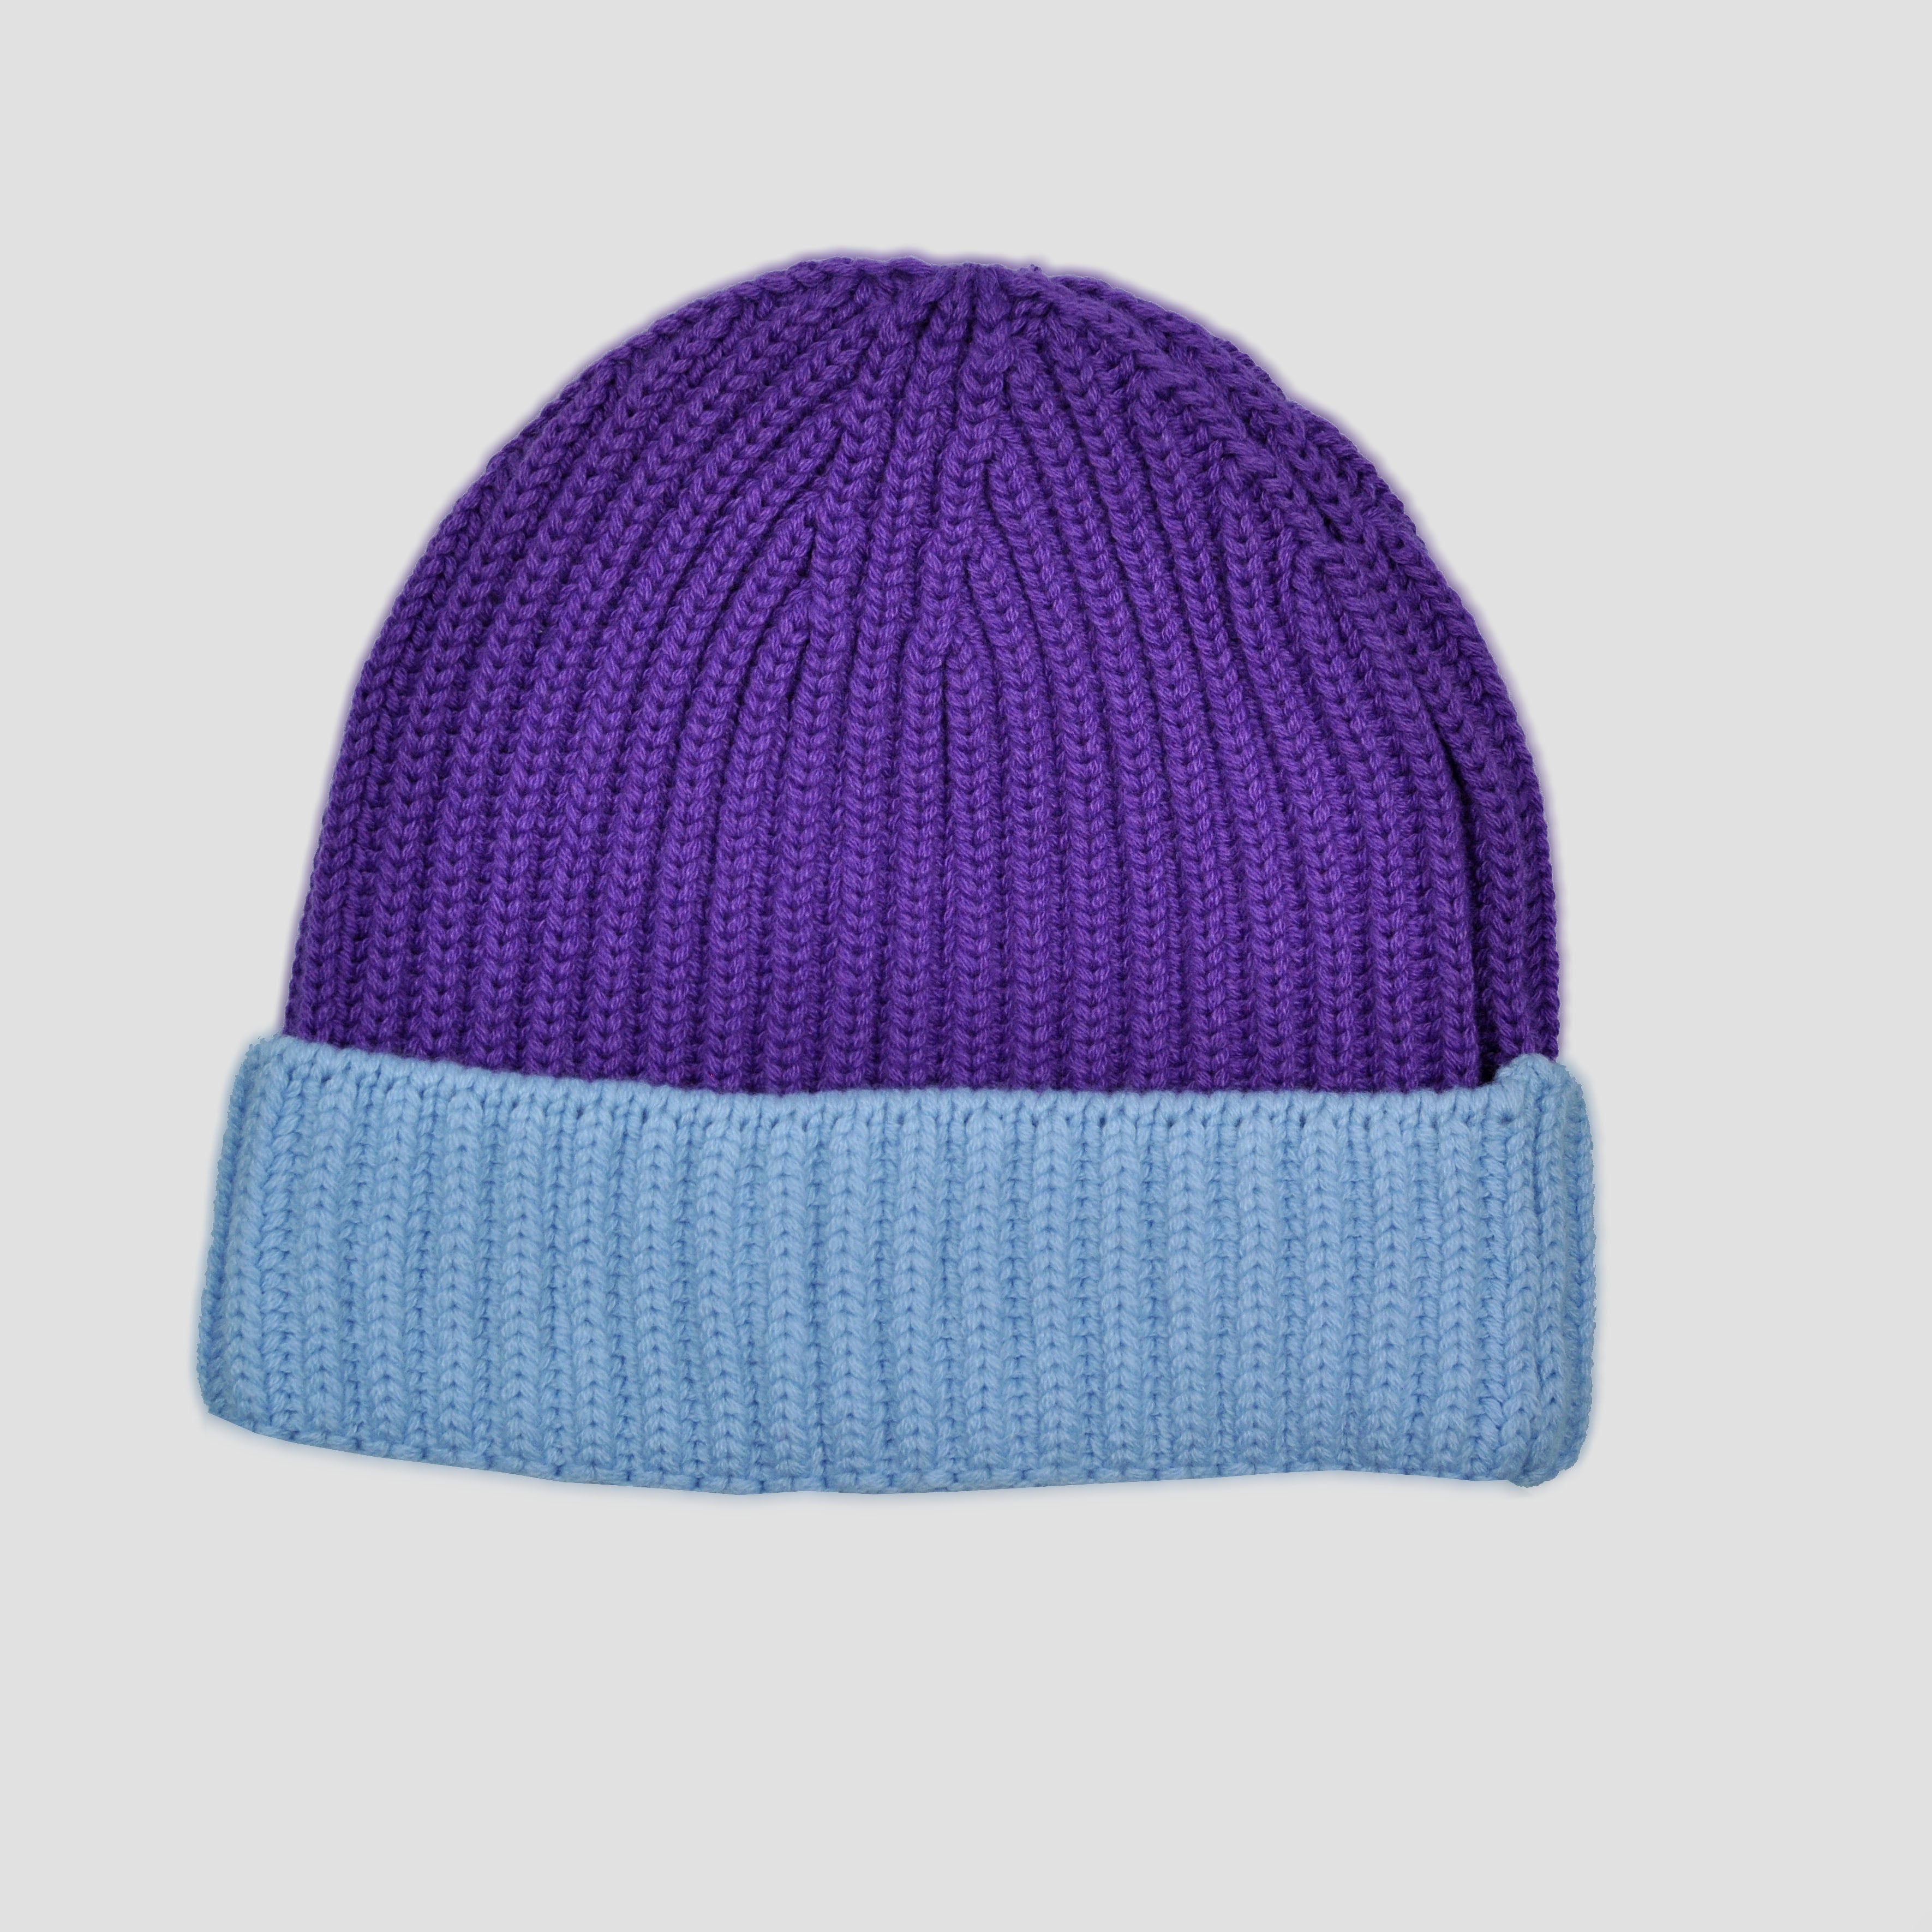 Four Ply Cashmere Winter Beanie in Purple & Light Blue